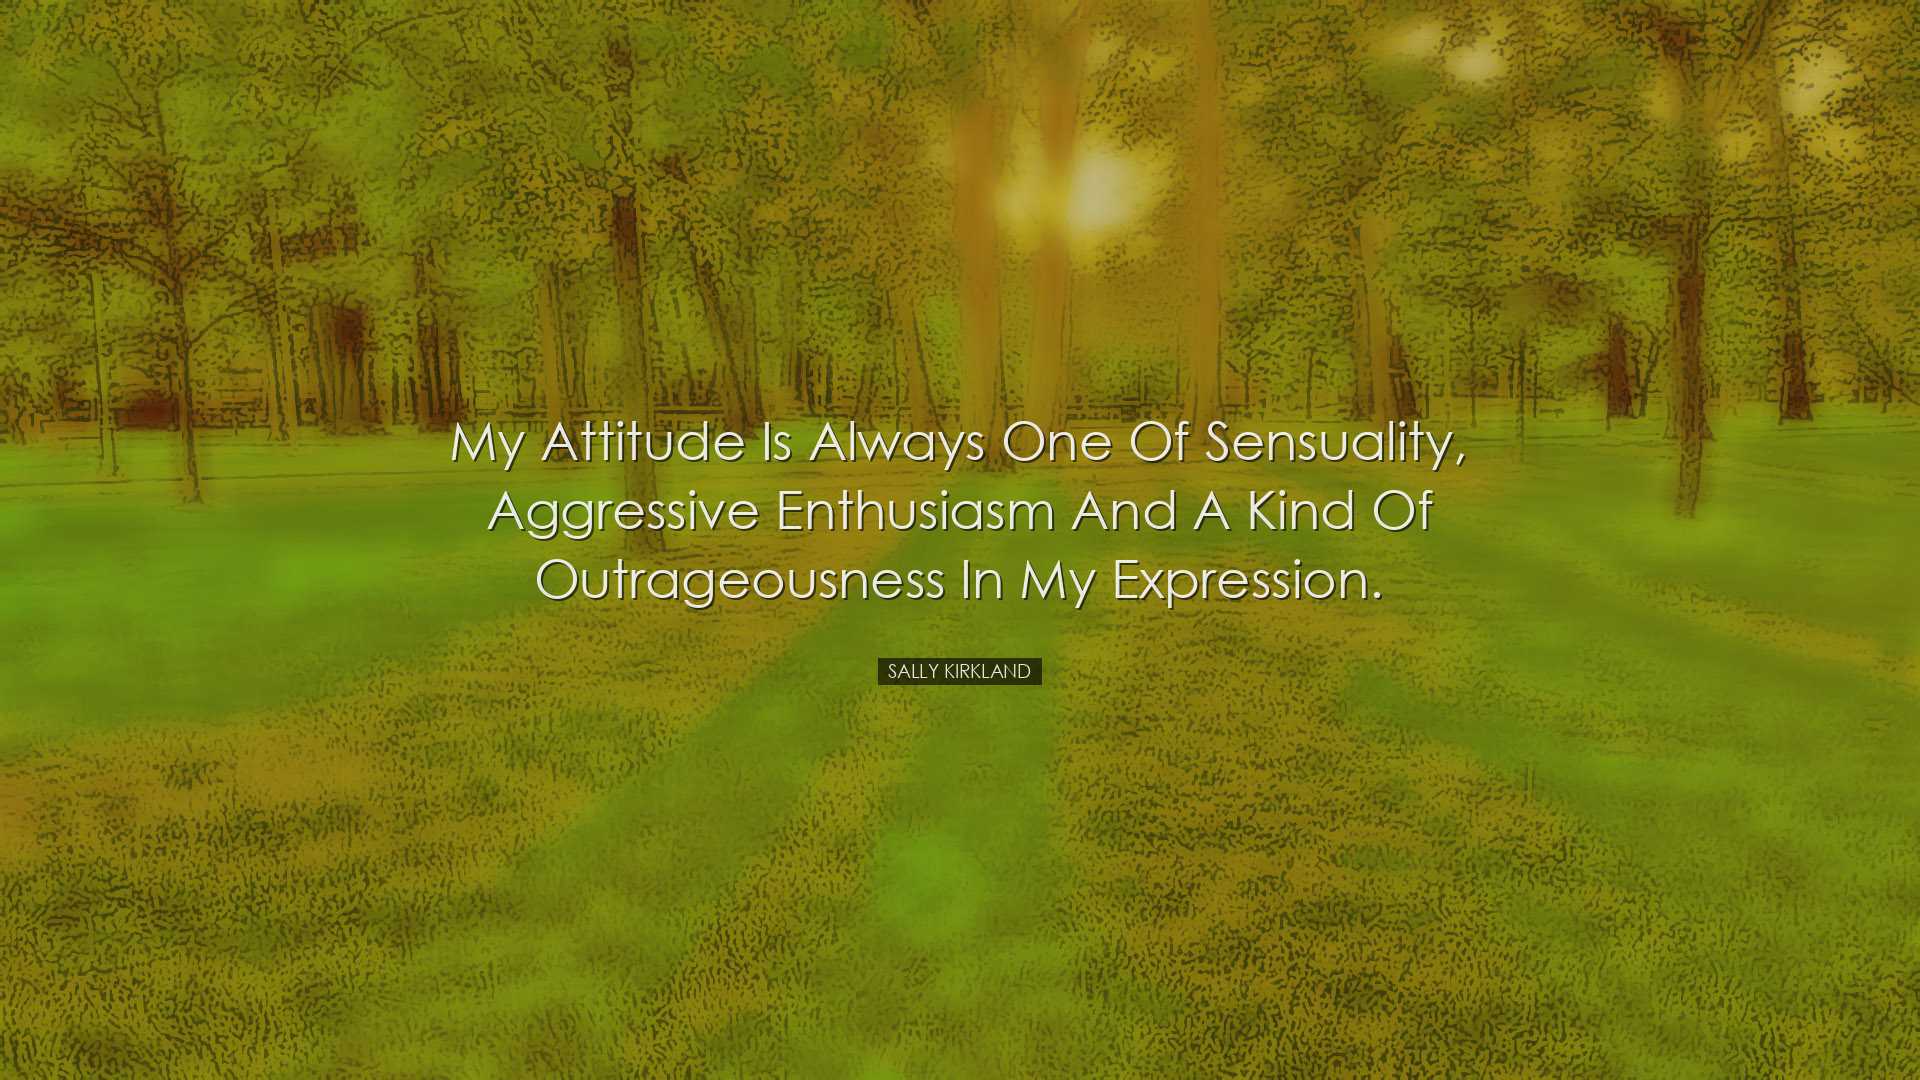 My attitude is always one of sensuality, aggressive enthusiasm and